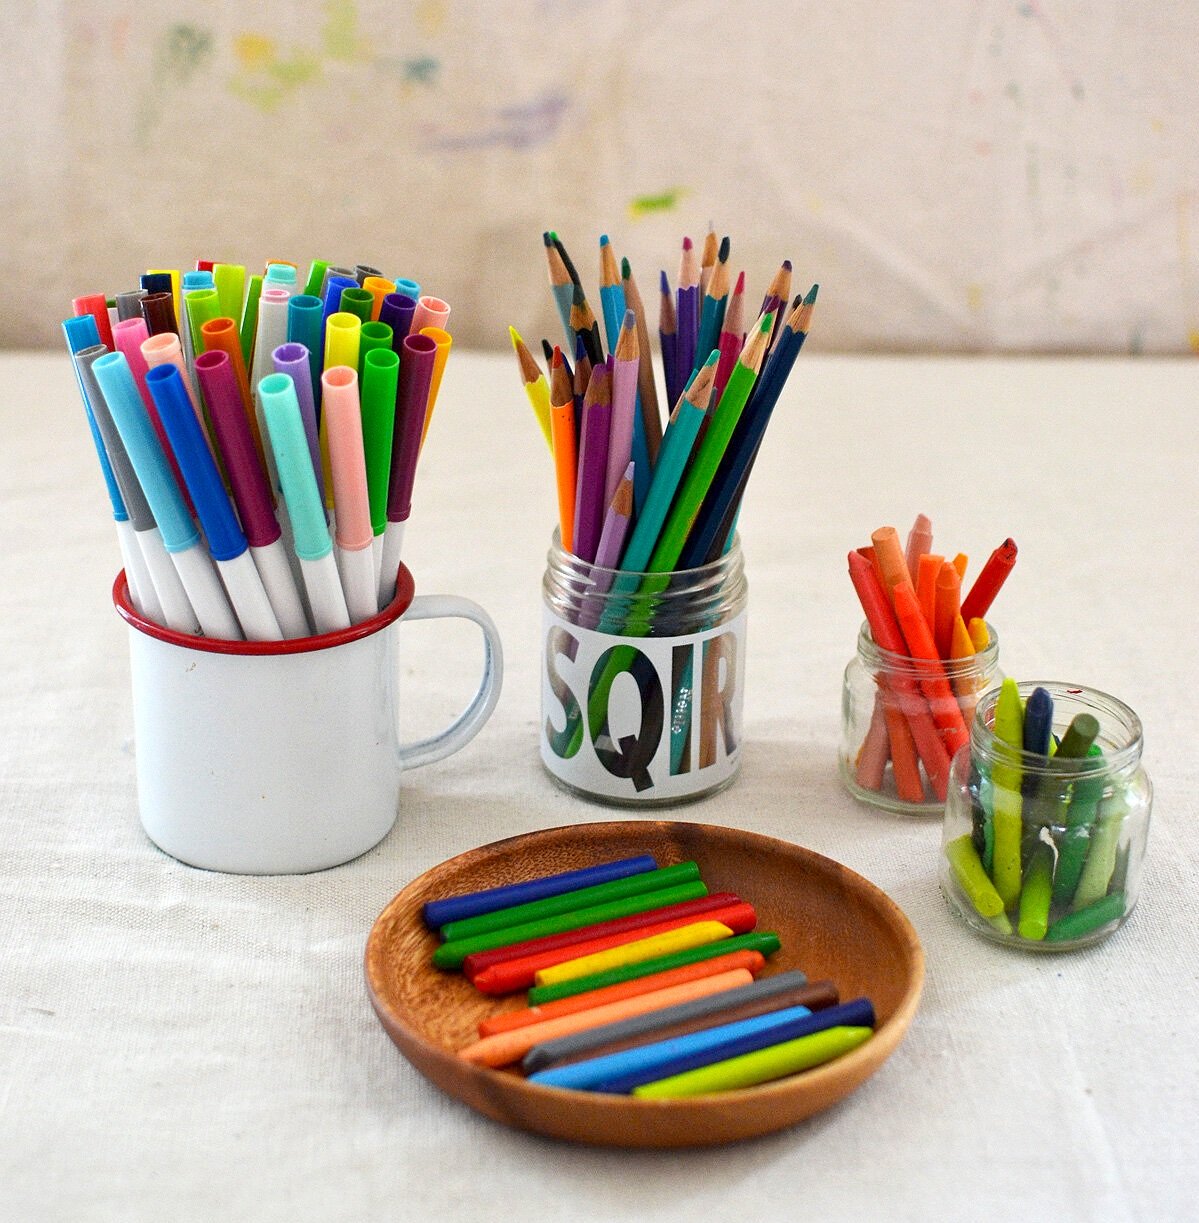 The Top 10 Resources for DIY + Craft Supplies - The Stripe